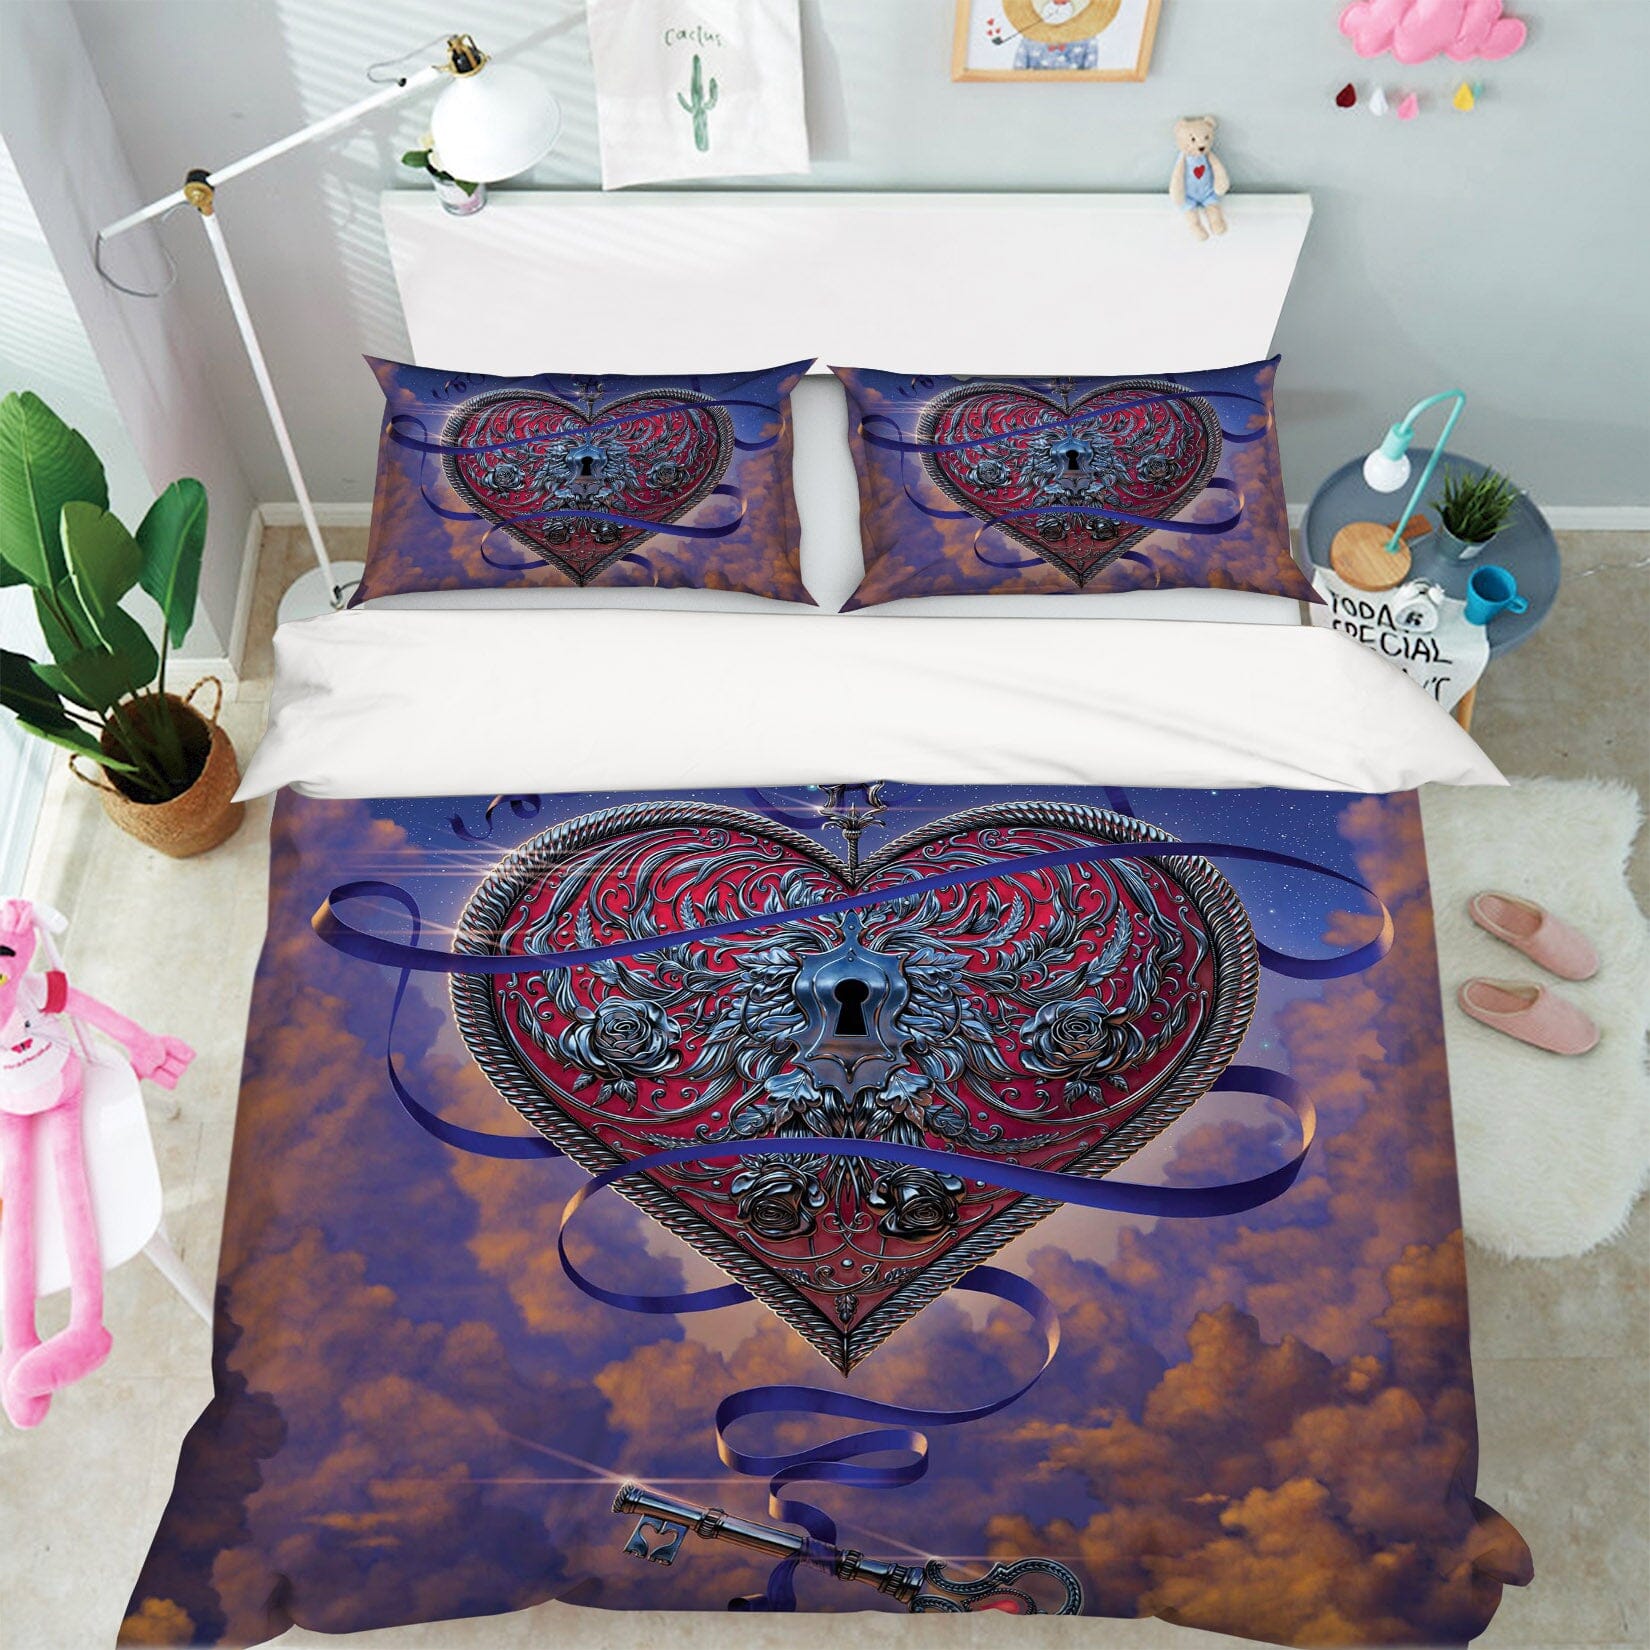 3D Heart And Key 049 Bed Pillowcases Quilt Exclusive Designer Vincent Quiet Covers AJ Creativity Home 